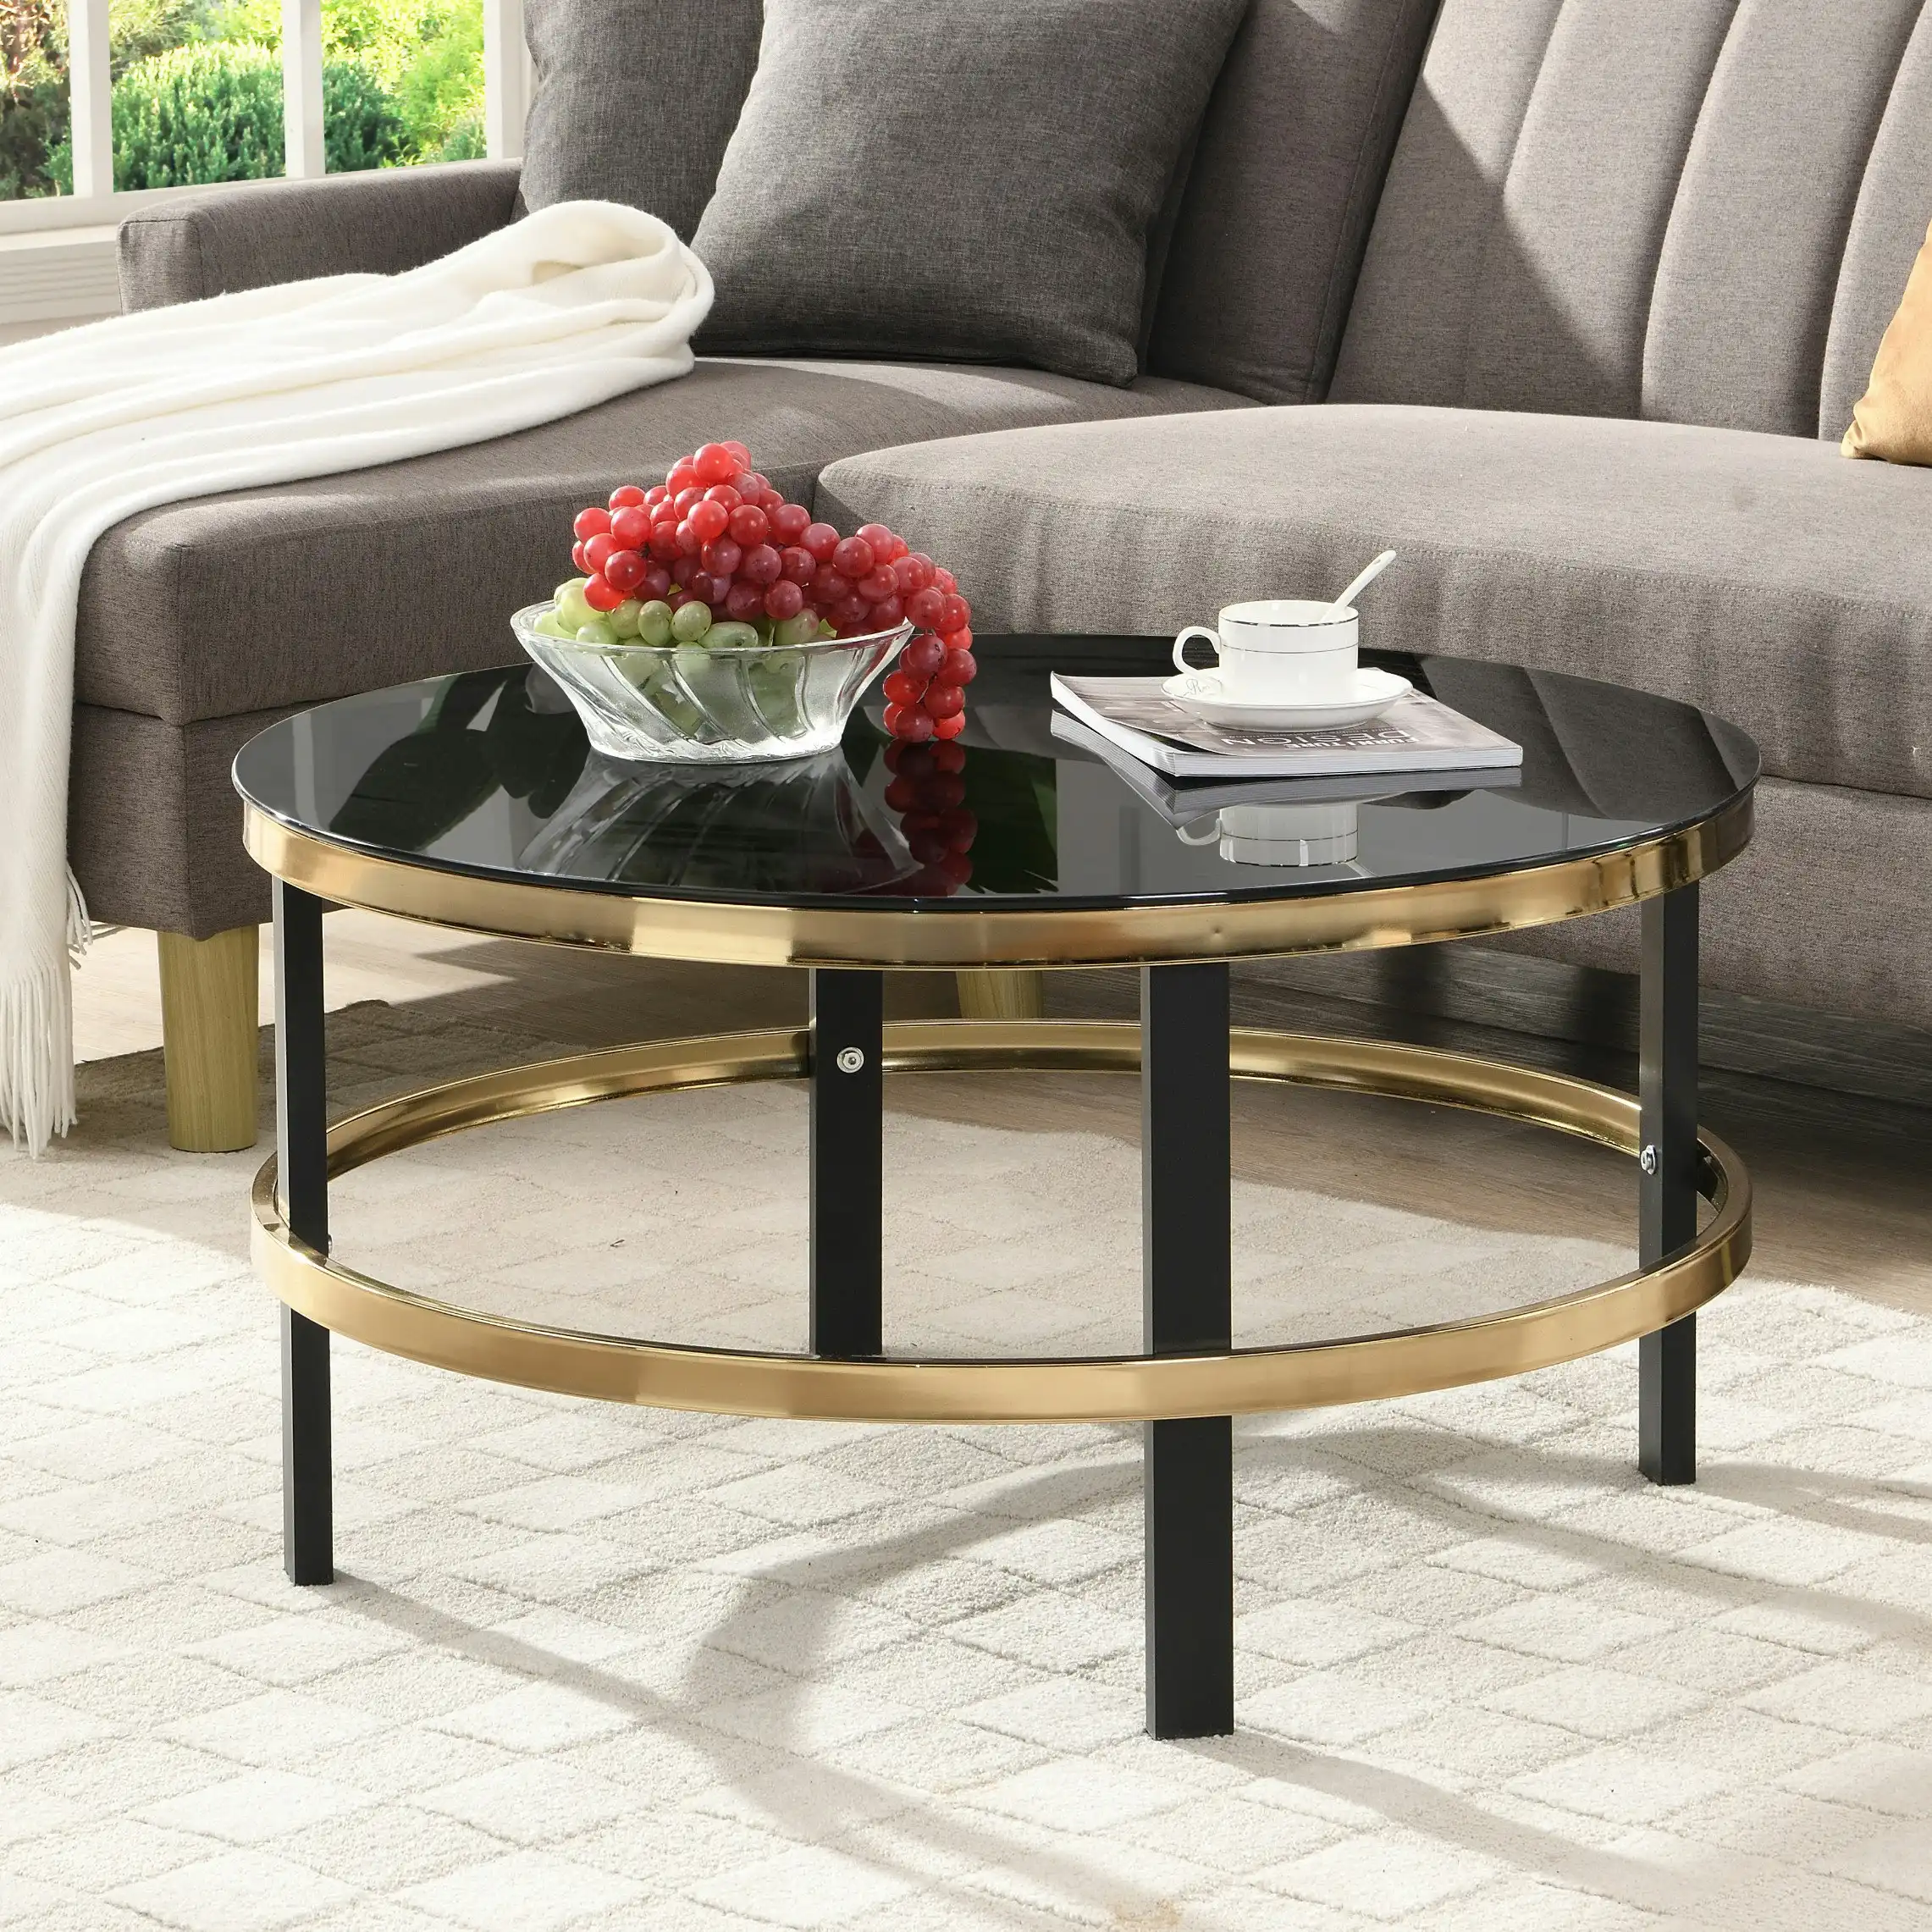 HLIVING Black Top Round Coffee Table, Tempered Glass Coffee Table, Black&Gold Finish